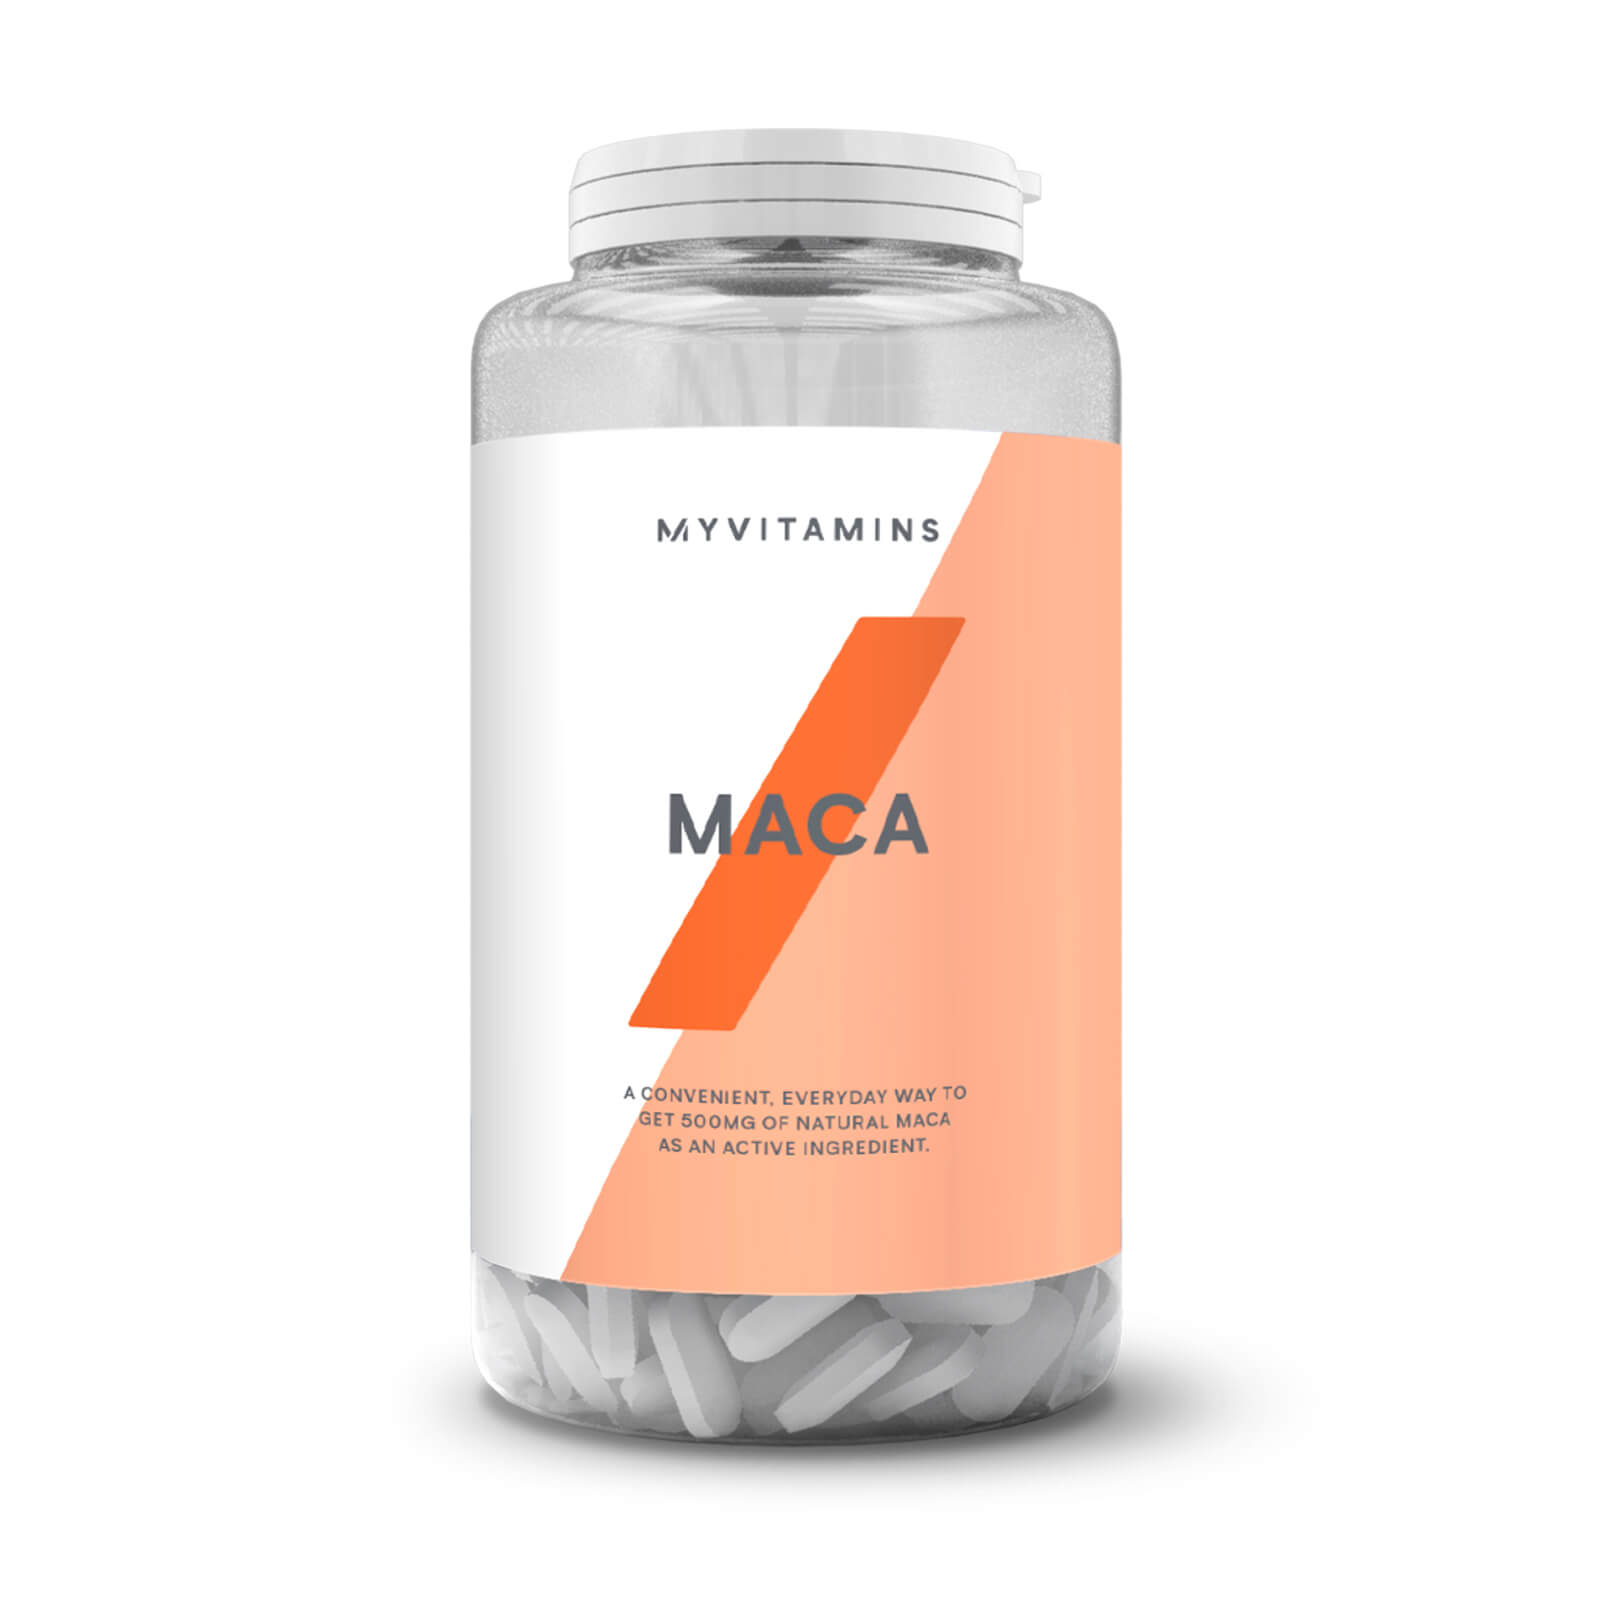 Myvitamins Maca Tablets - 3 Months (180 Tablets)